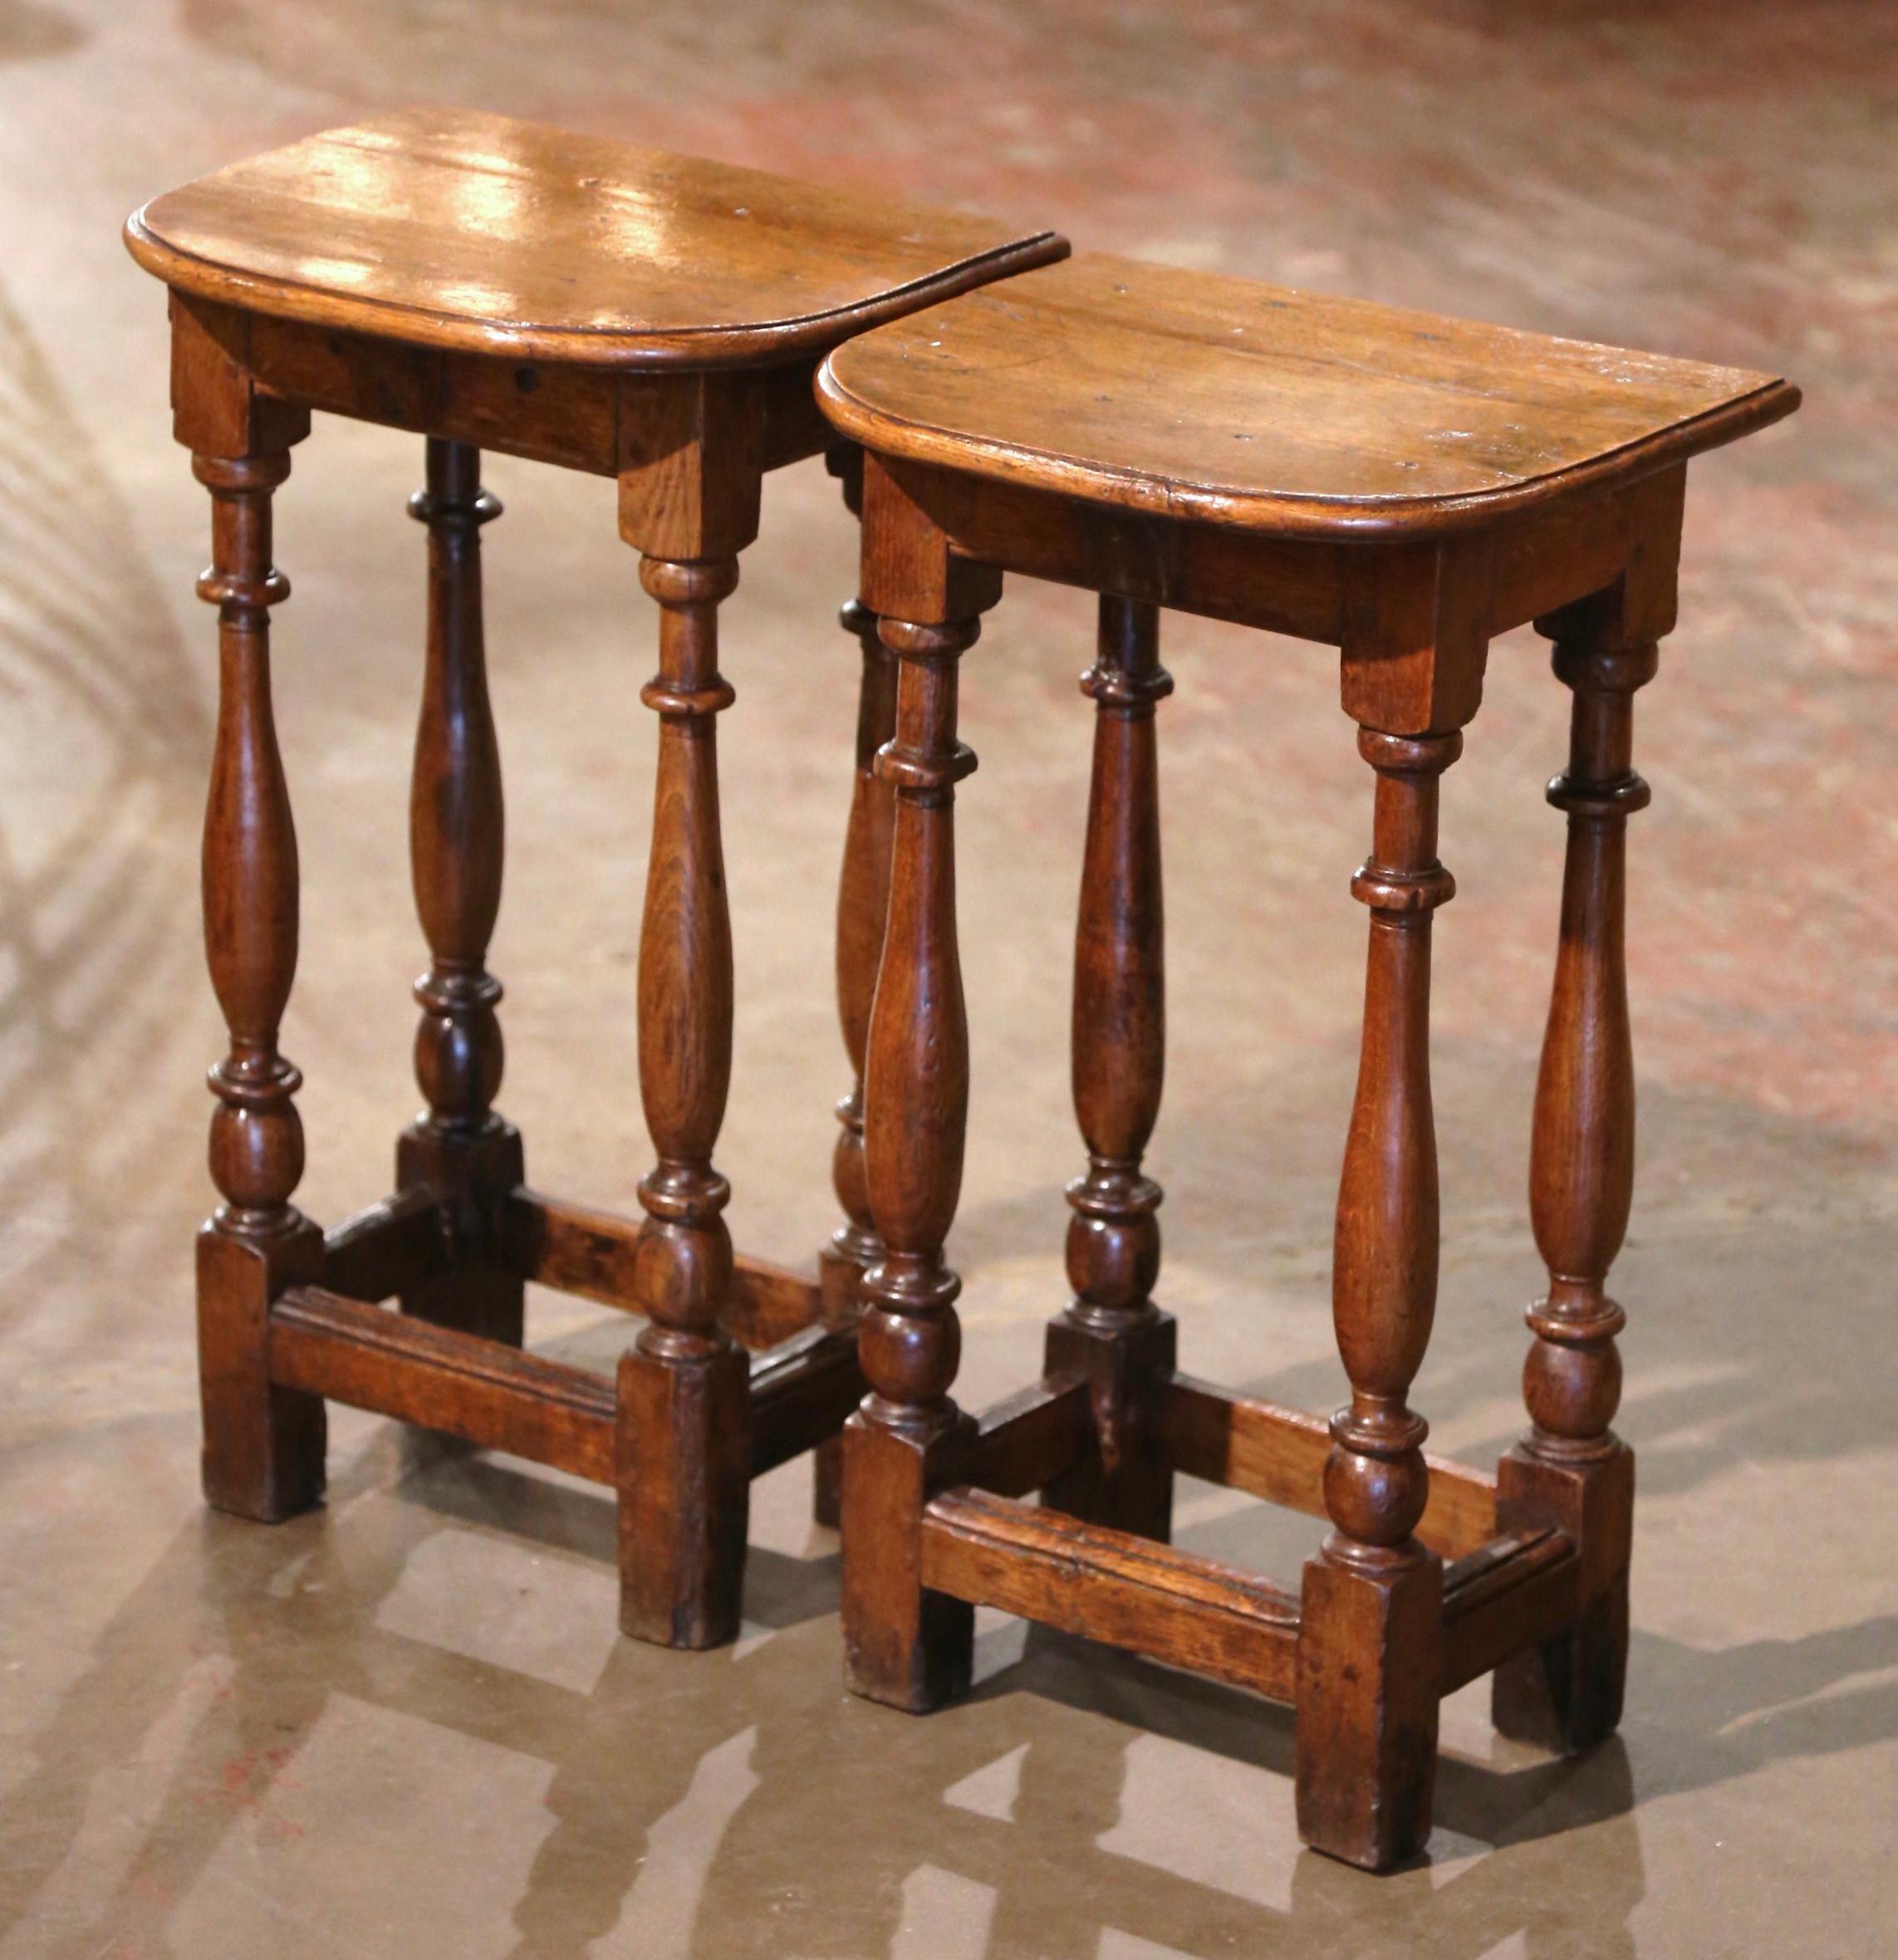 This elegant antique side tables were created in Normandy, France circa 1780. Built of oak and attached with pegs, each piece stands on four turned legs connected with a sturdy stretcher at the bottom. The top surface is curved across the front. The